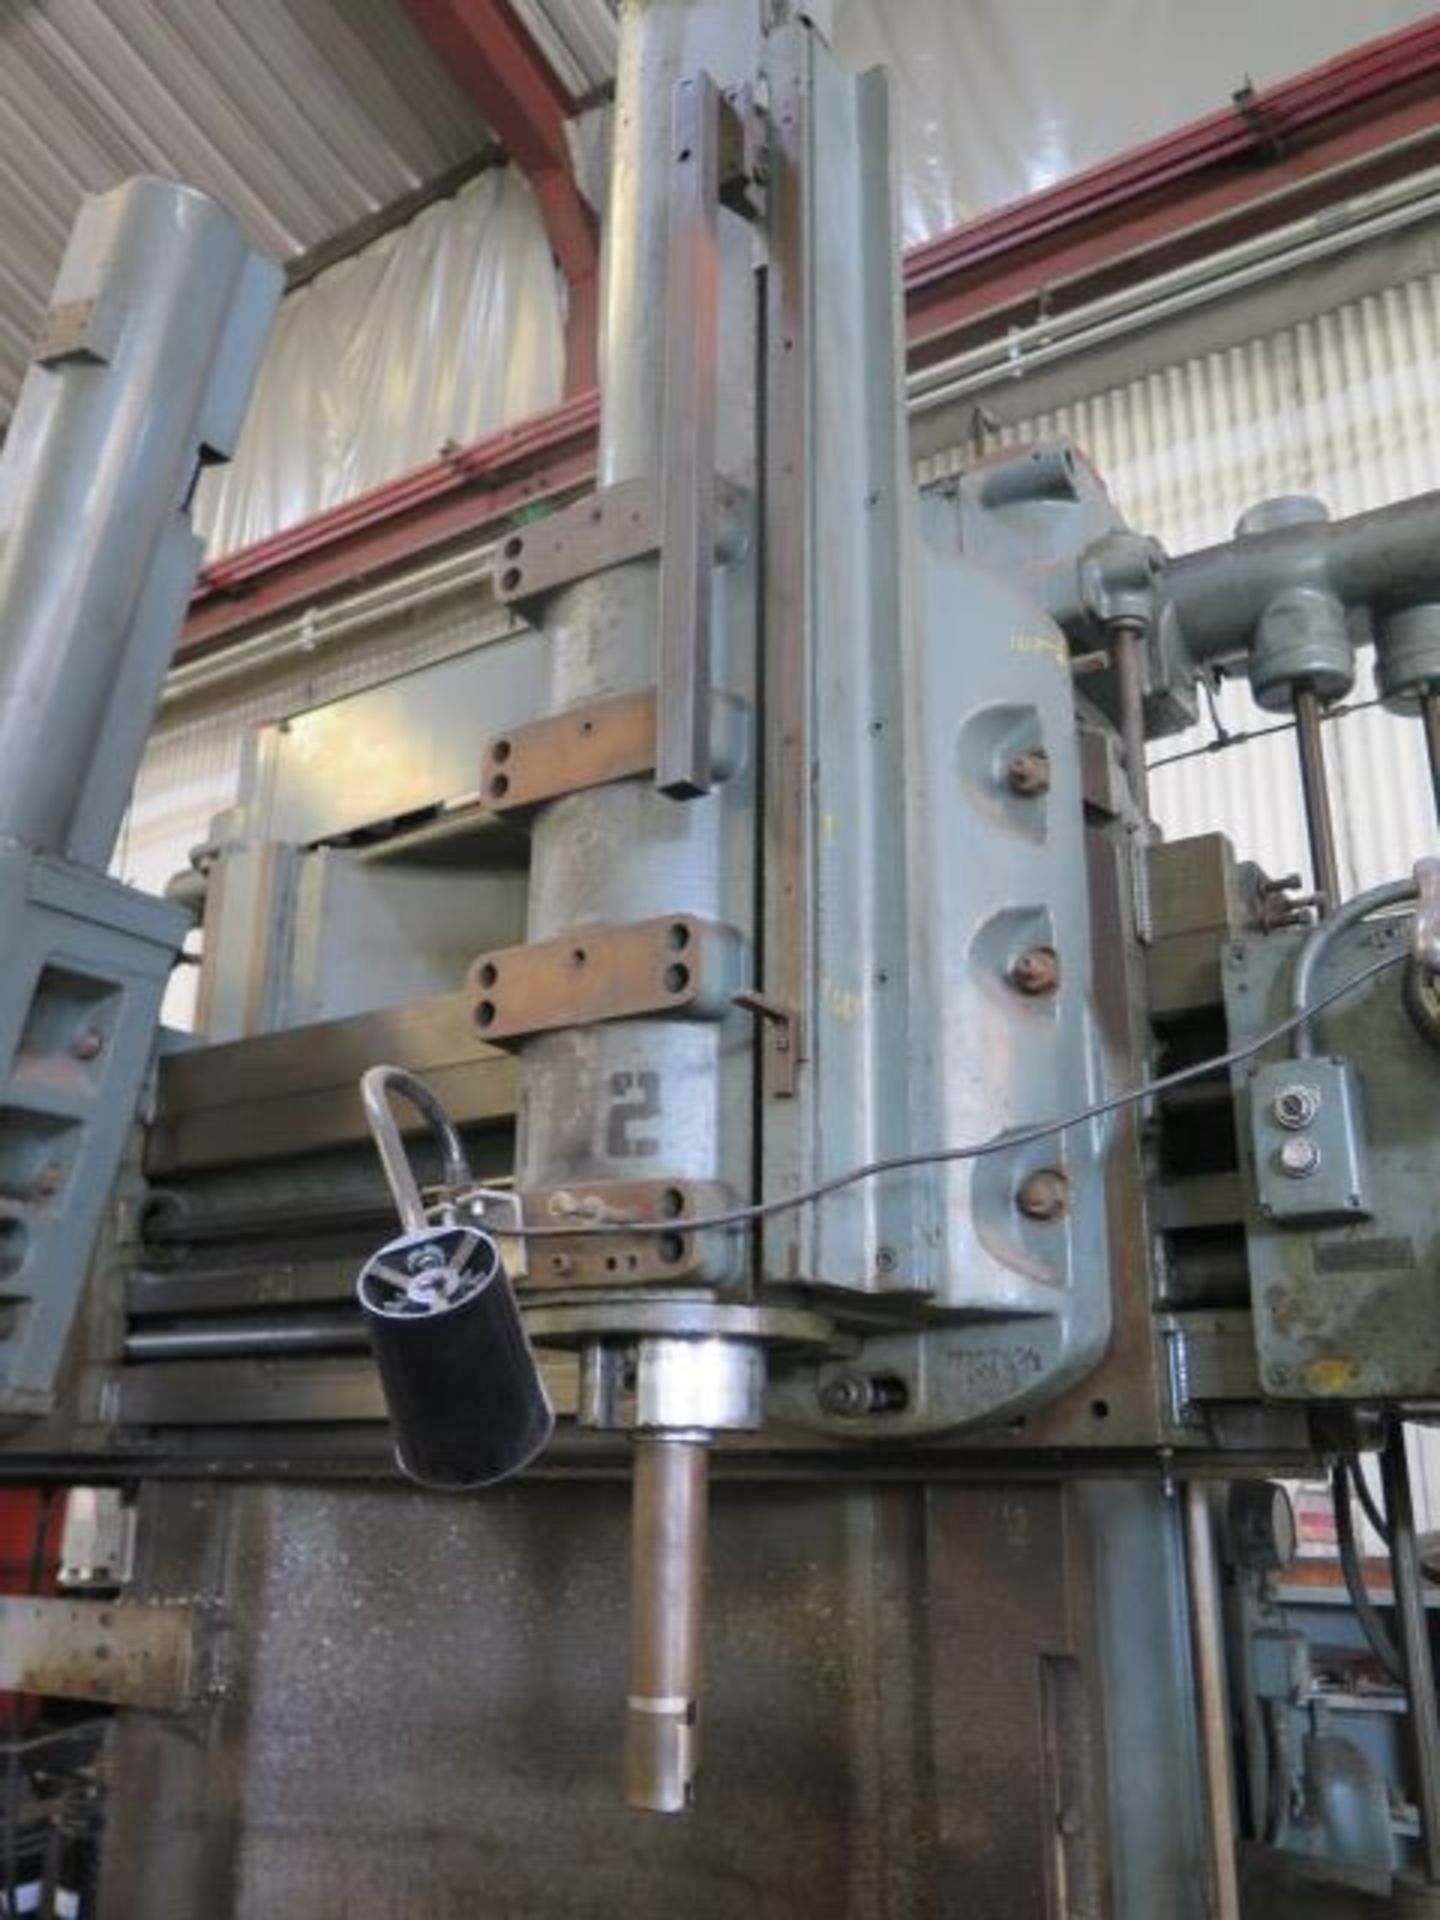 Bullard 54” Vertical Boring Mill w/ 4.3-160 RPM, 63” Swing, Hyd Tracer Head, SOLD AS IS - Image 8 of 17